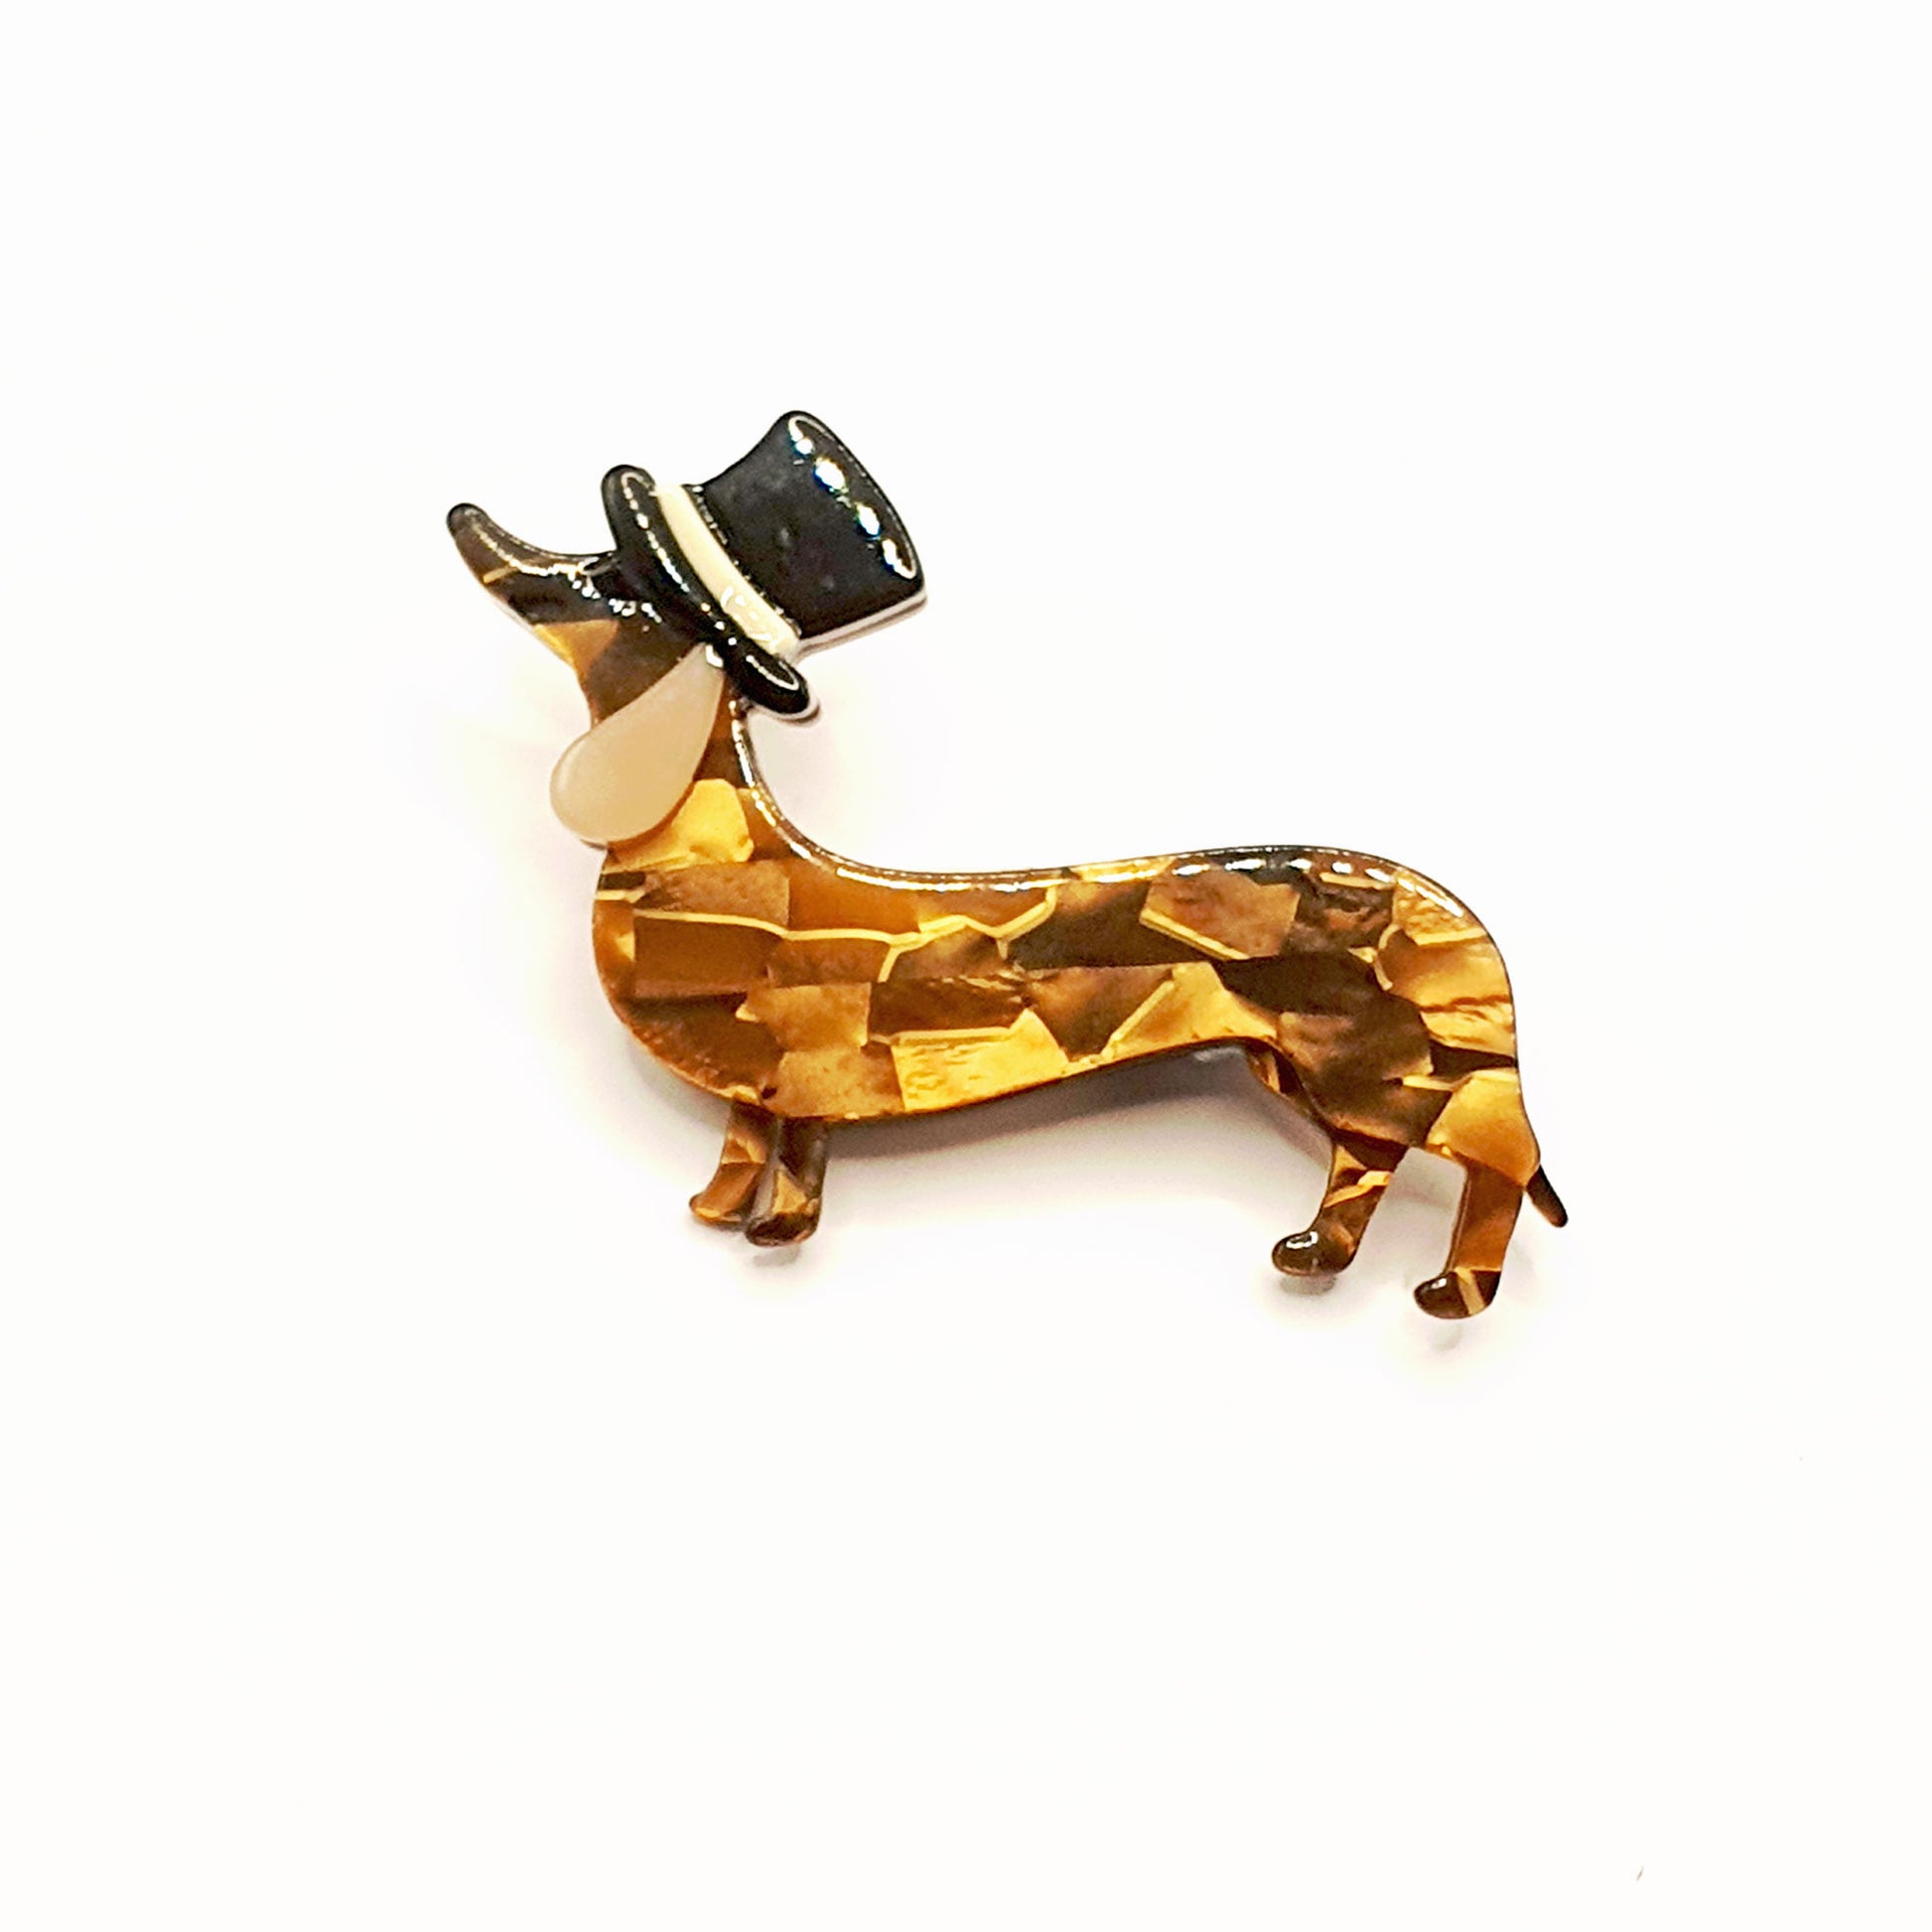 Quirky resin dachshund brooch with a top hat